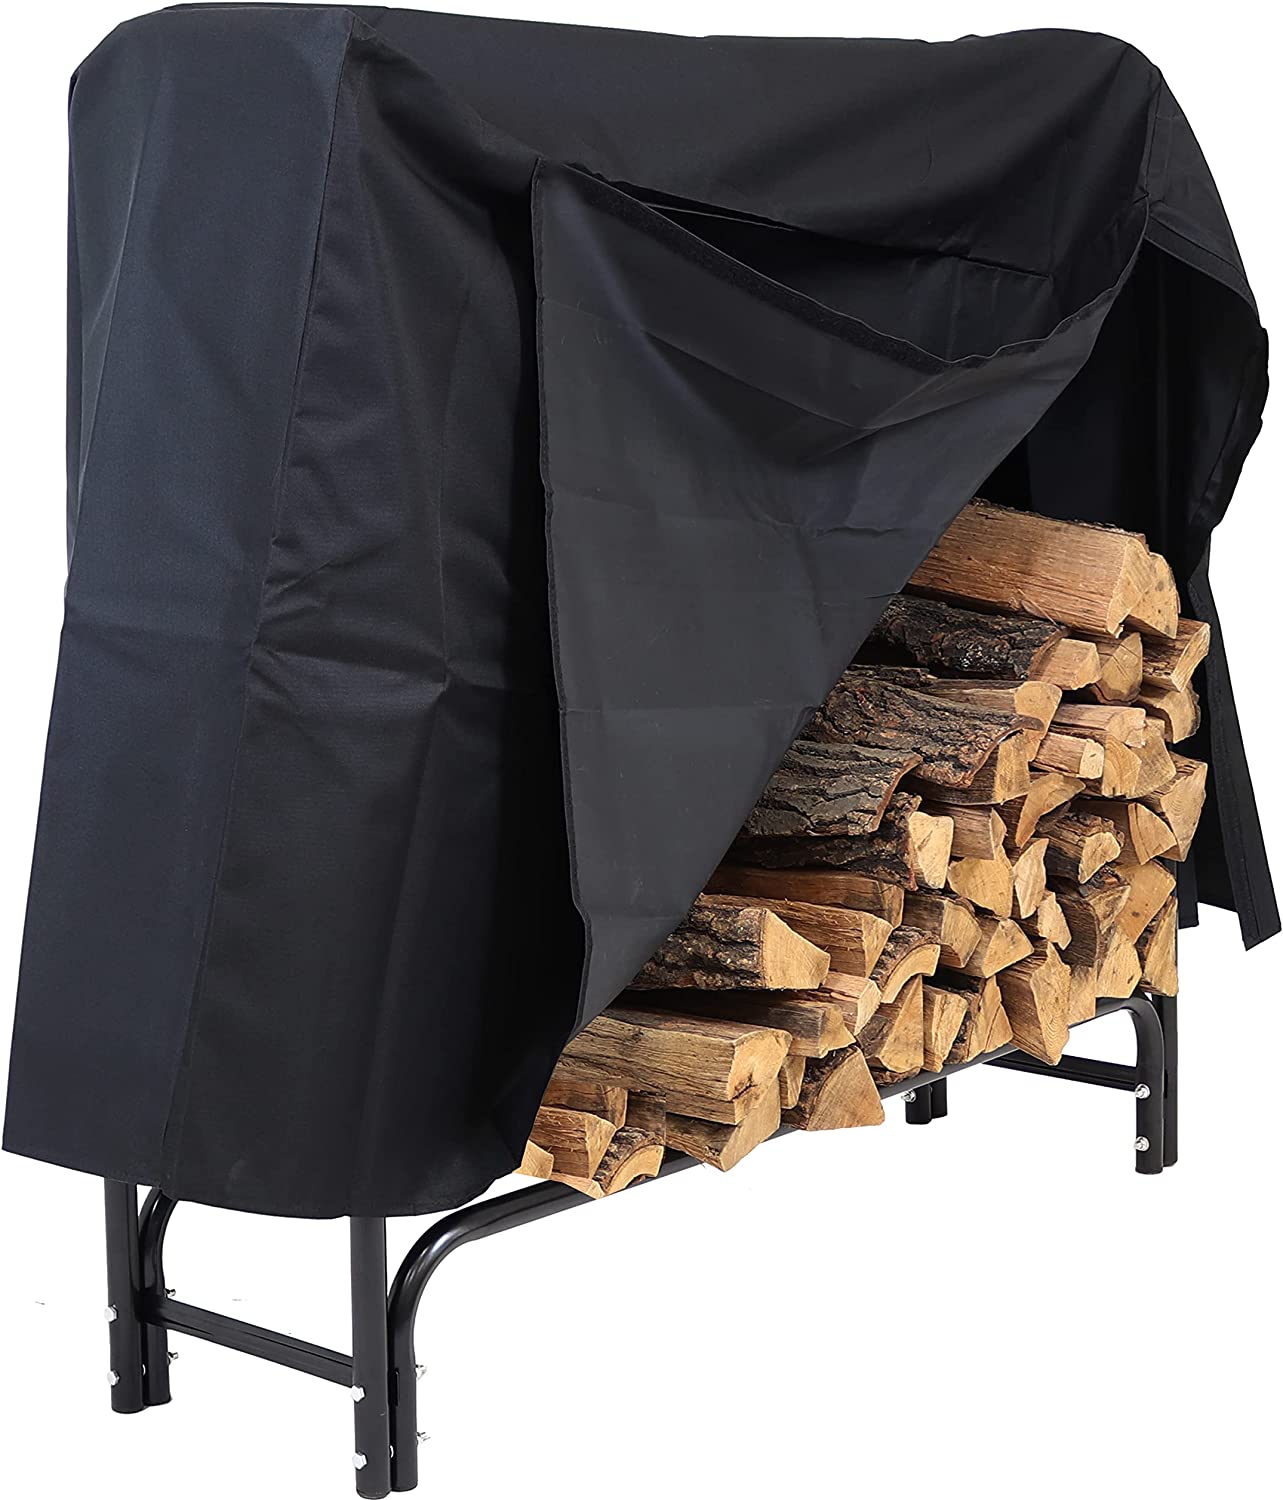 Outdoor Firewood Log Rack and Cover Set - 4-Foot Powder-Coated Steel Lumber Storage System with Durable Weather-Resistant Protective Black PVC Top - image 1 of 9